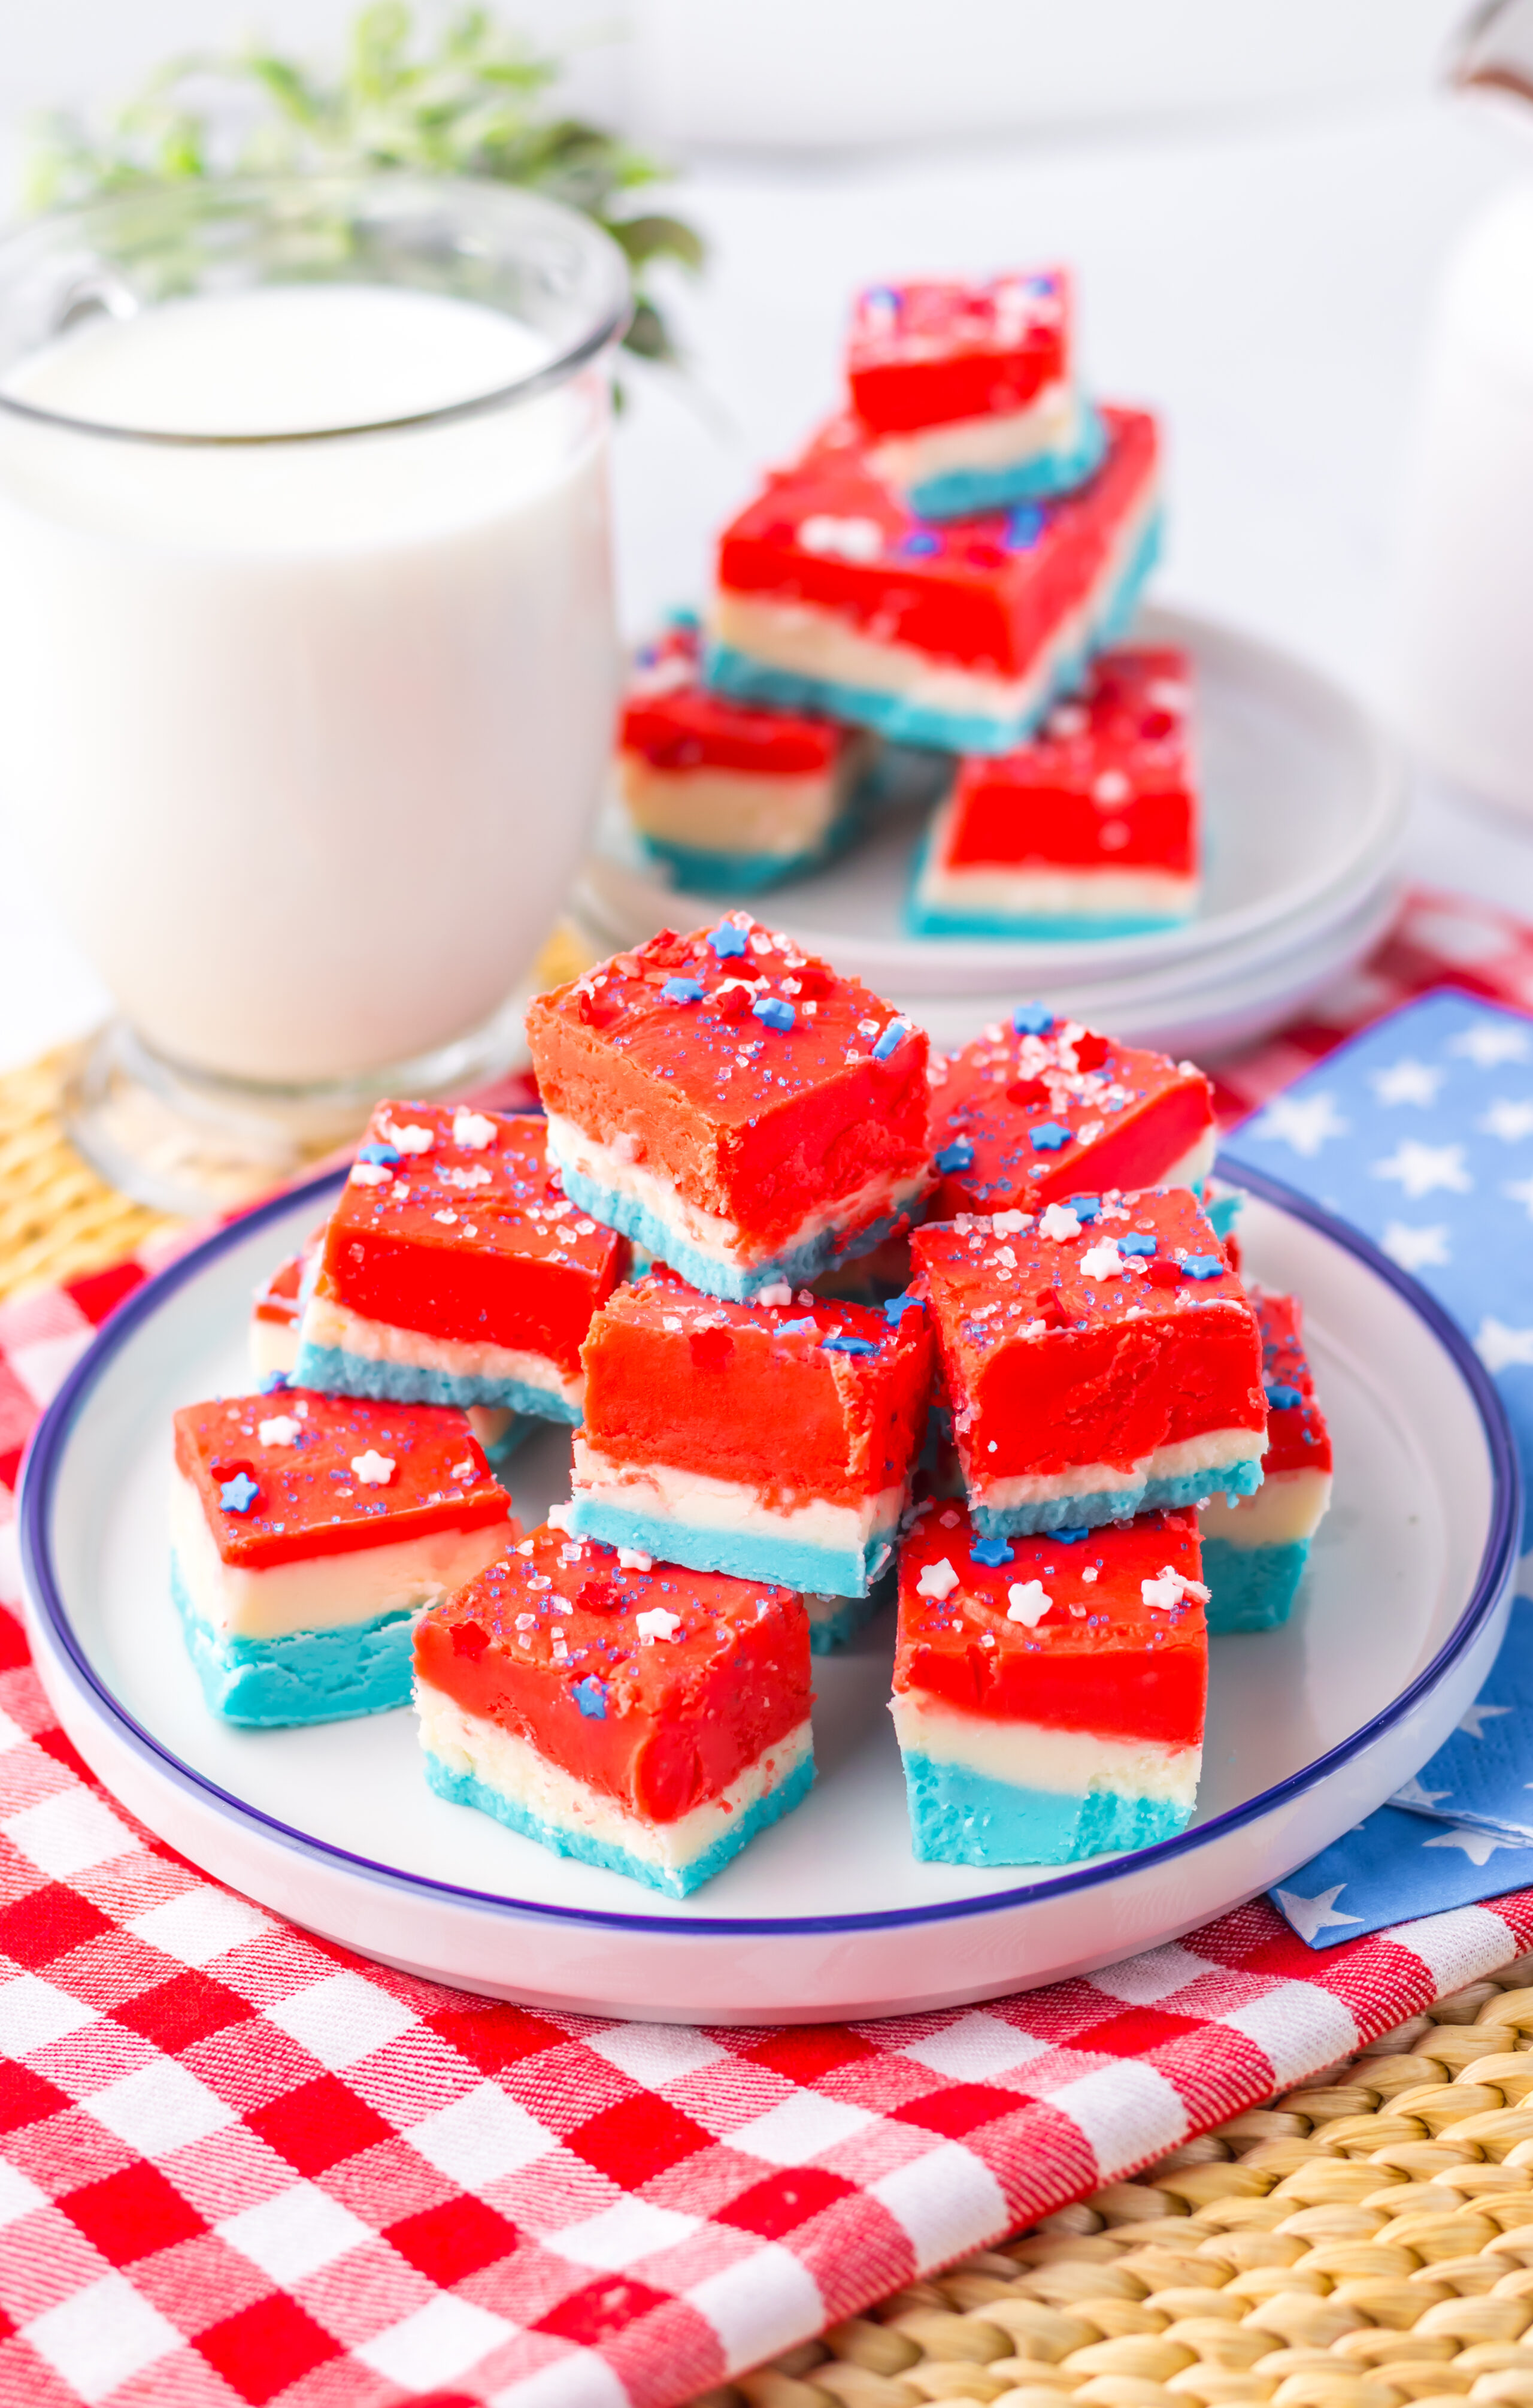 a red, white, and blue layered fudge in pieces on a plate.